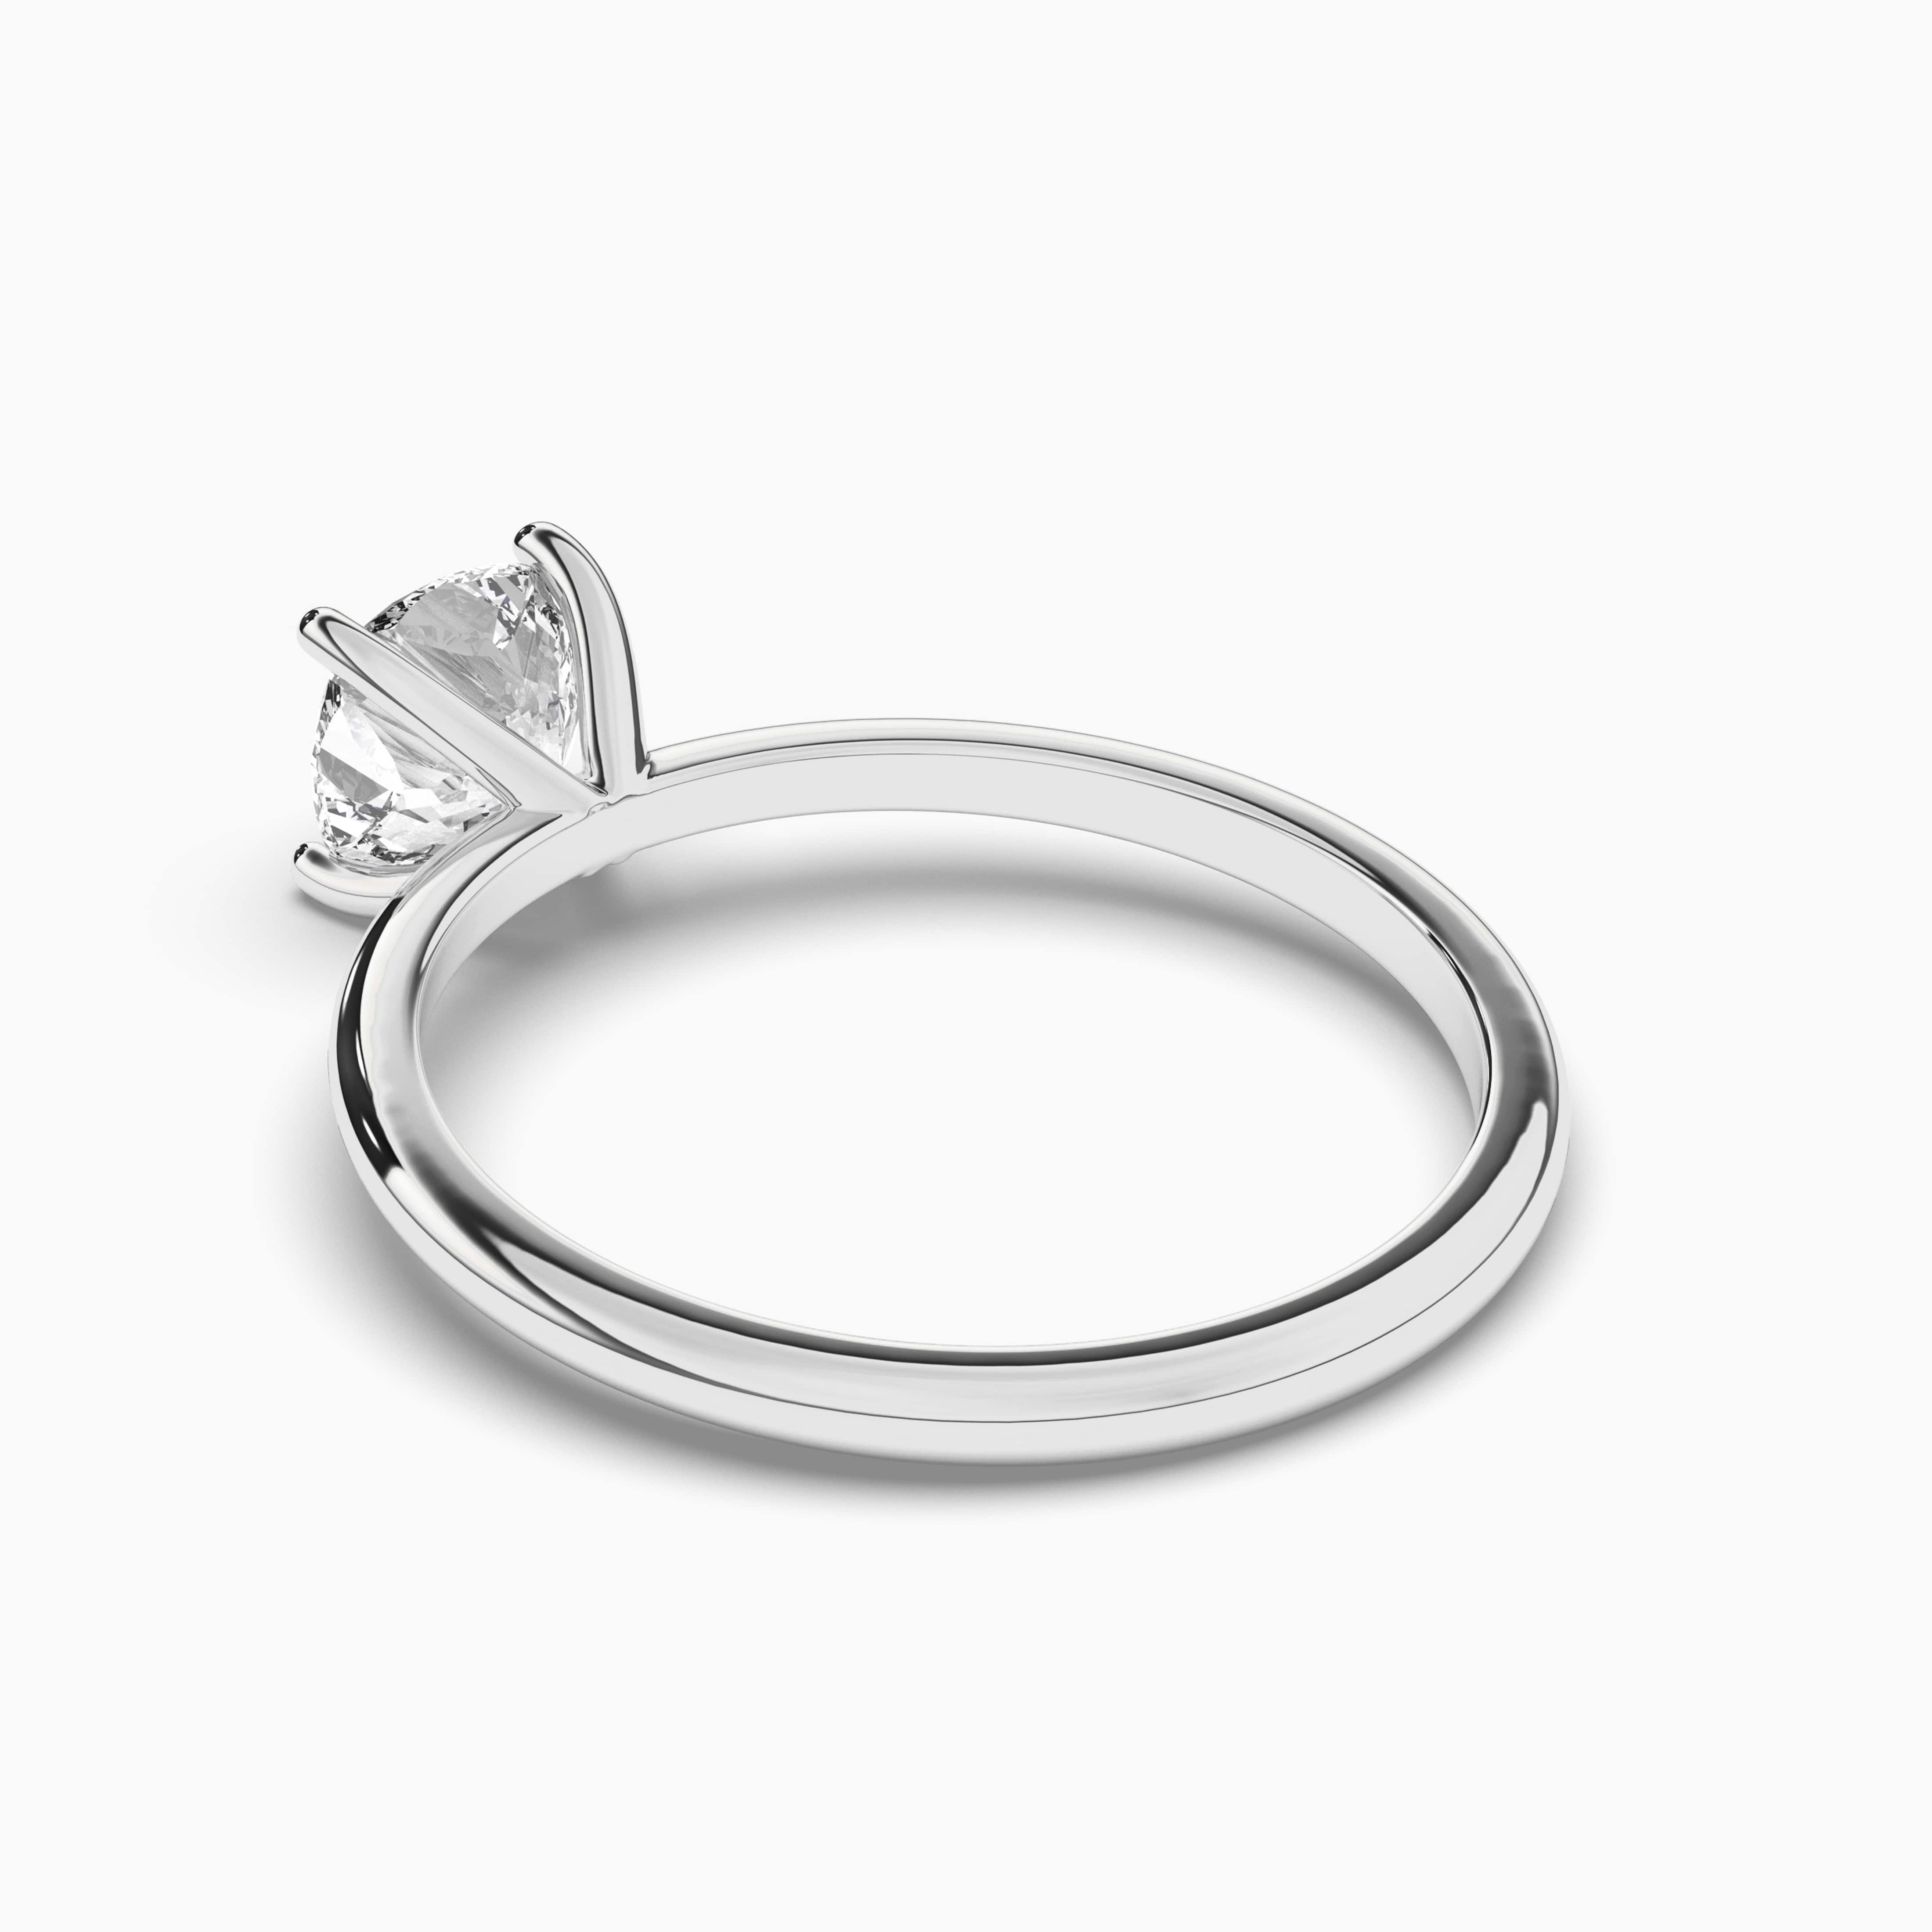 Solitaire Engagement Ring With Elongated Cushion Cut